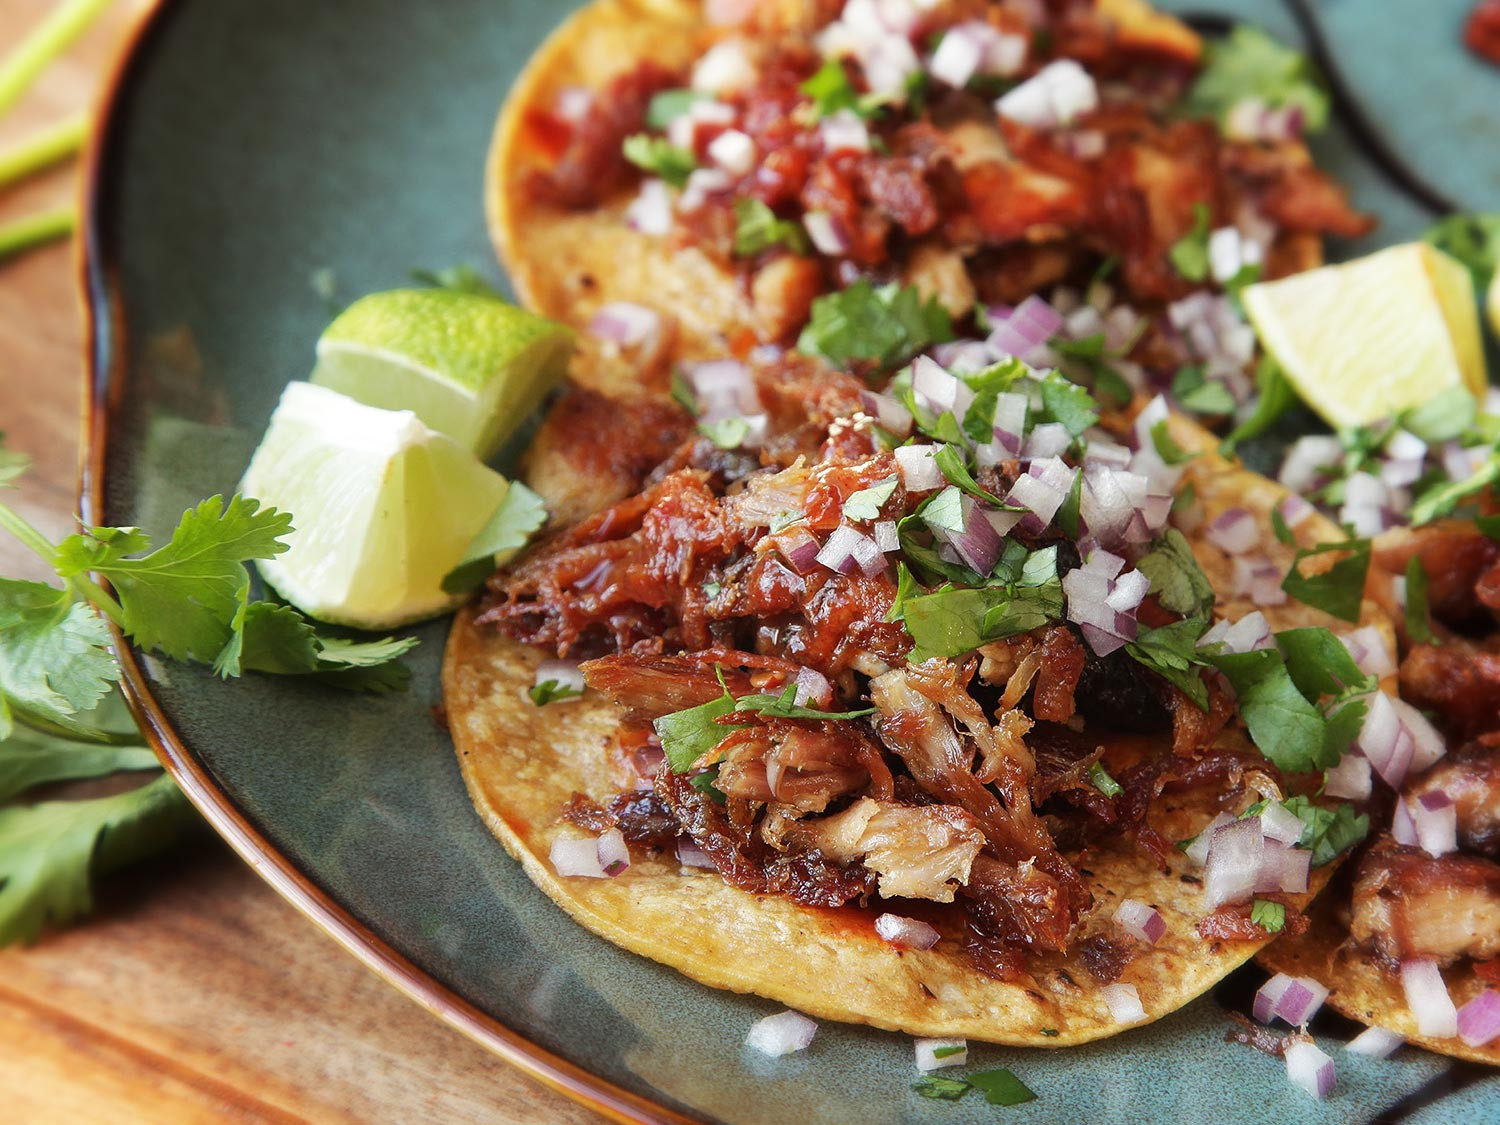 What To Do With Thanksgiving Leftovers
 Transform Your Leftover Turkey Into Crispy Juicy Carnitas